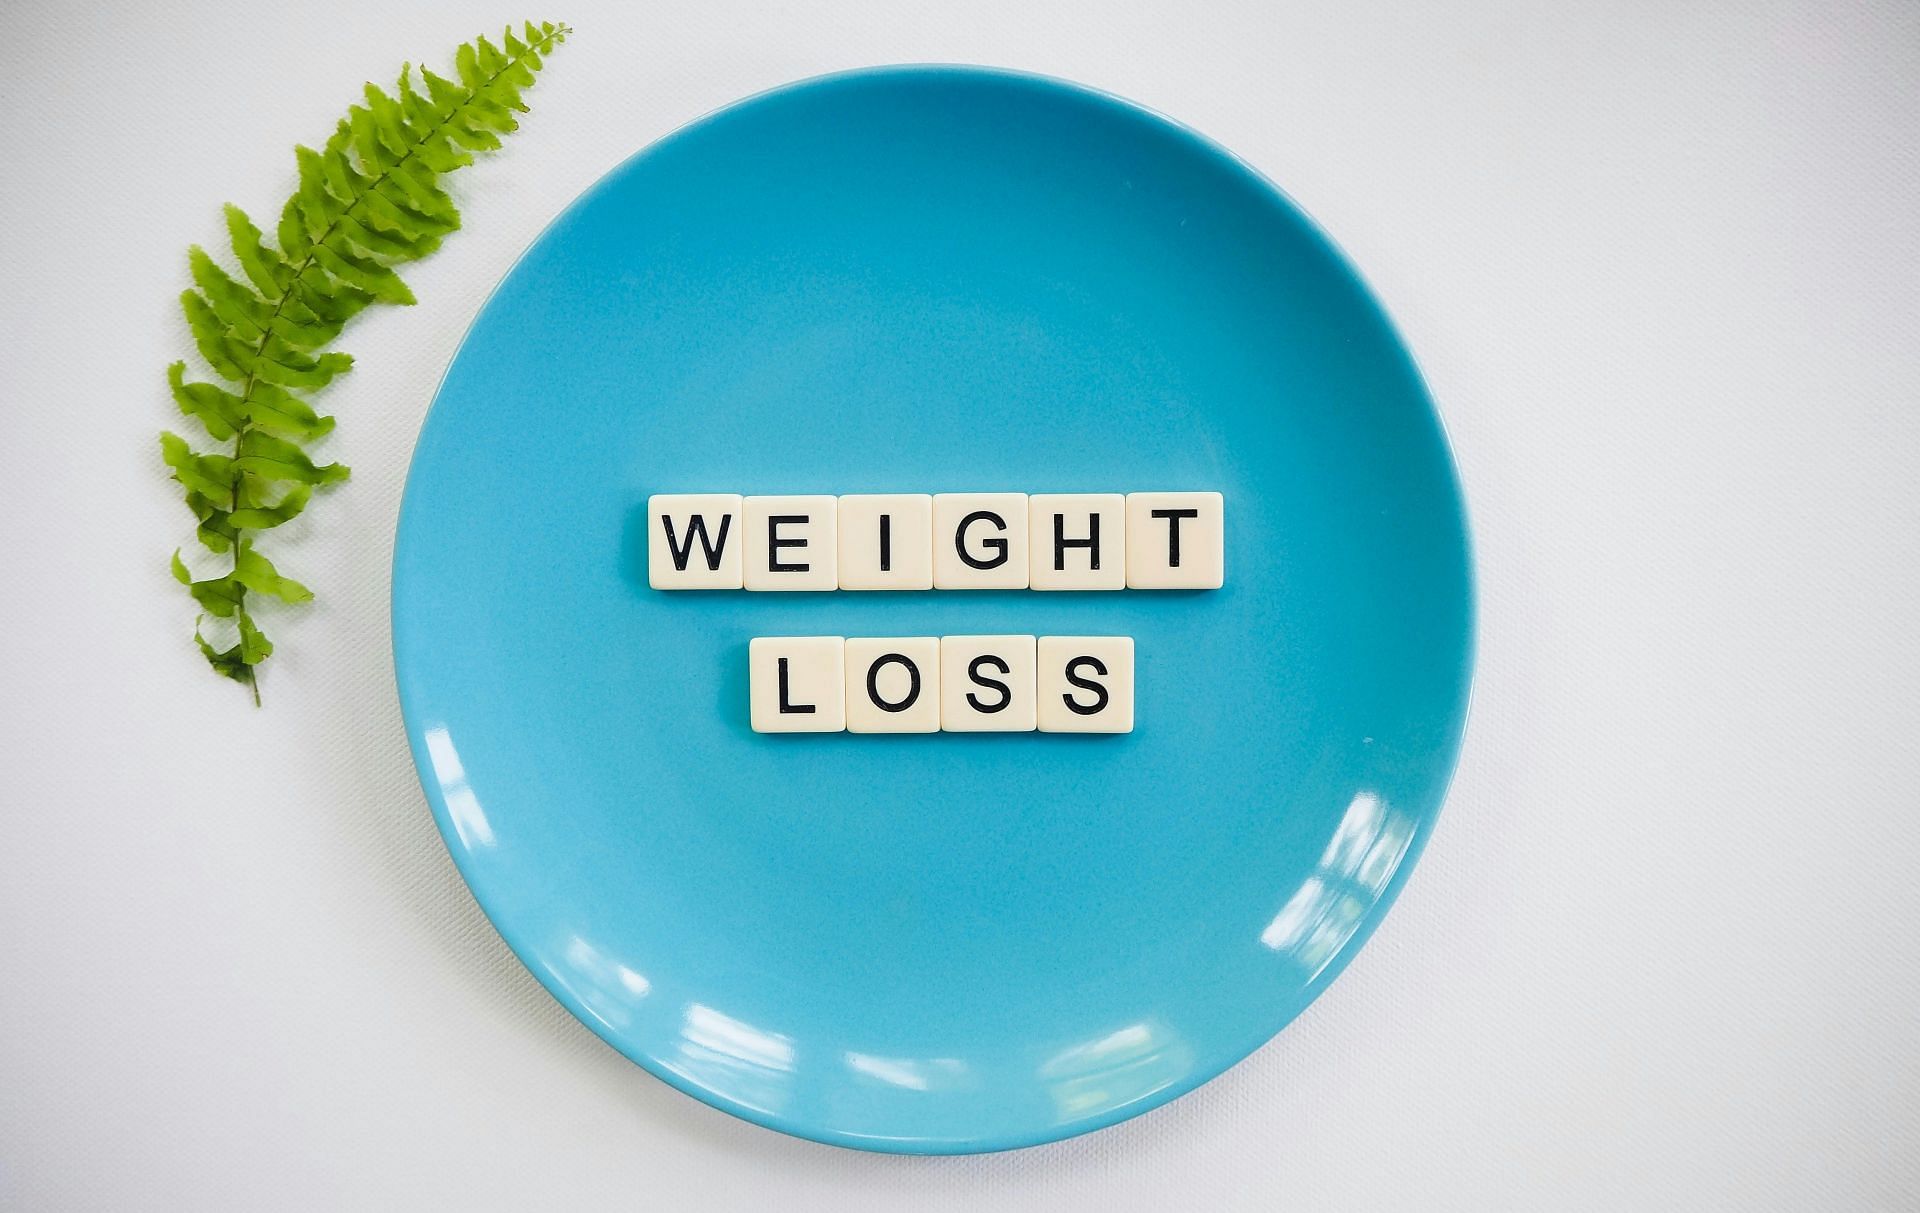 Cauliflower leaves aiding in weight loss(Image by Total Slash/Unsplash)